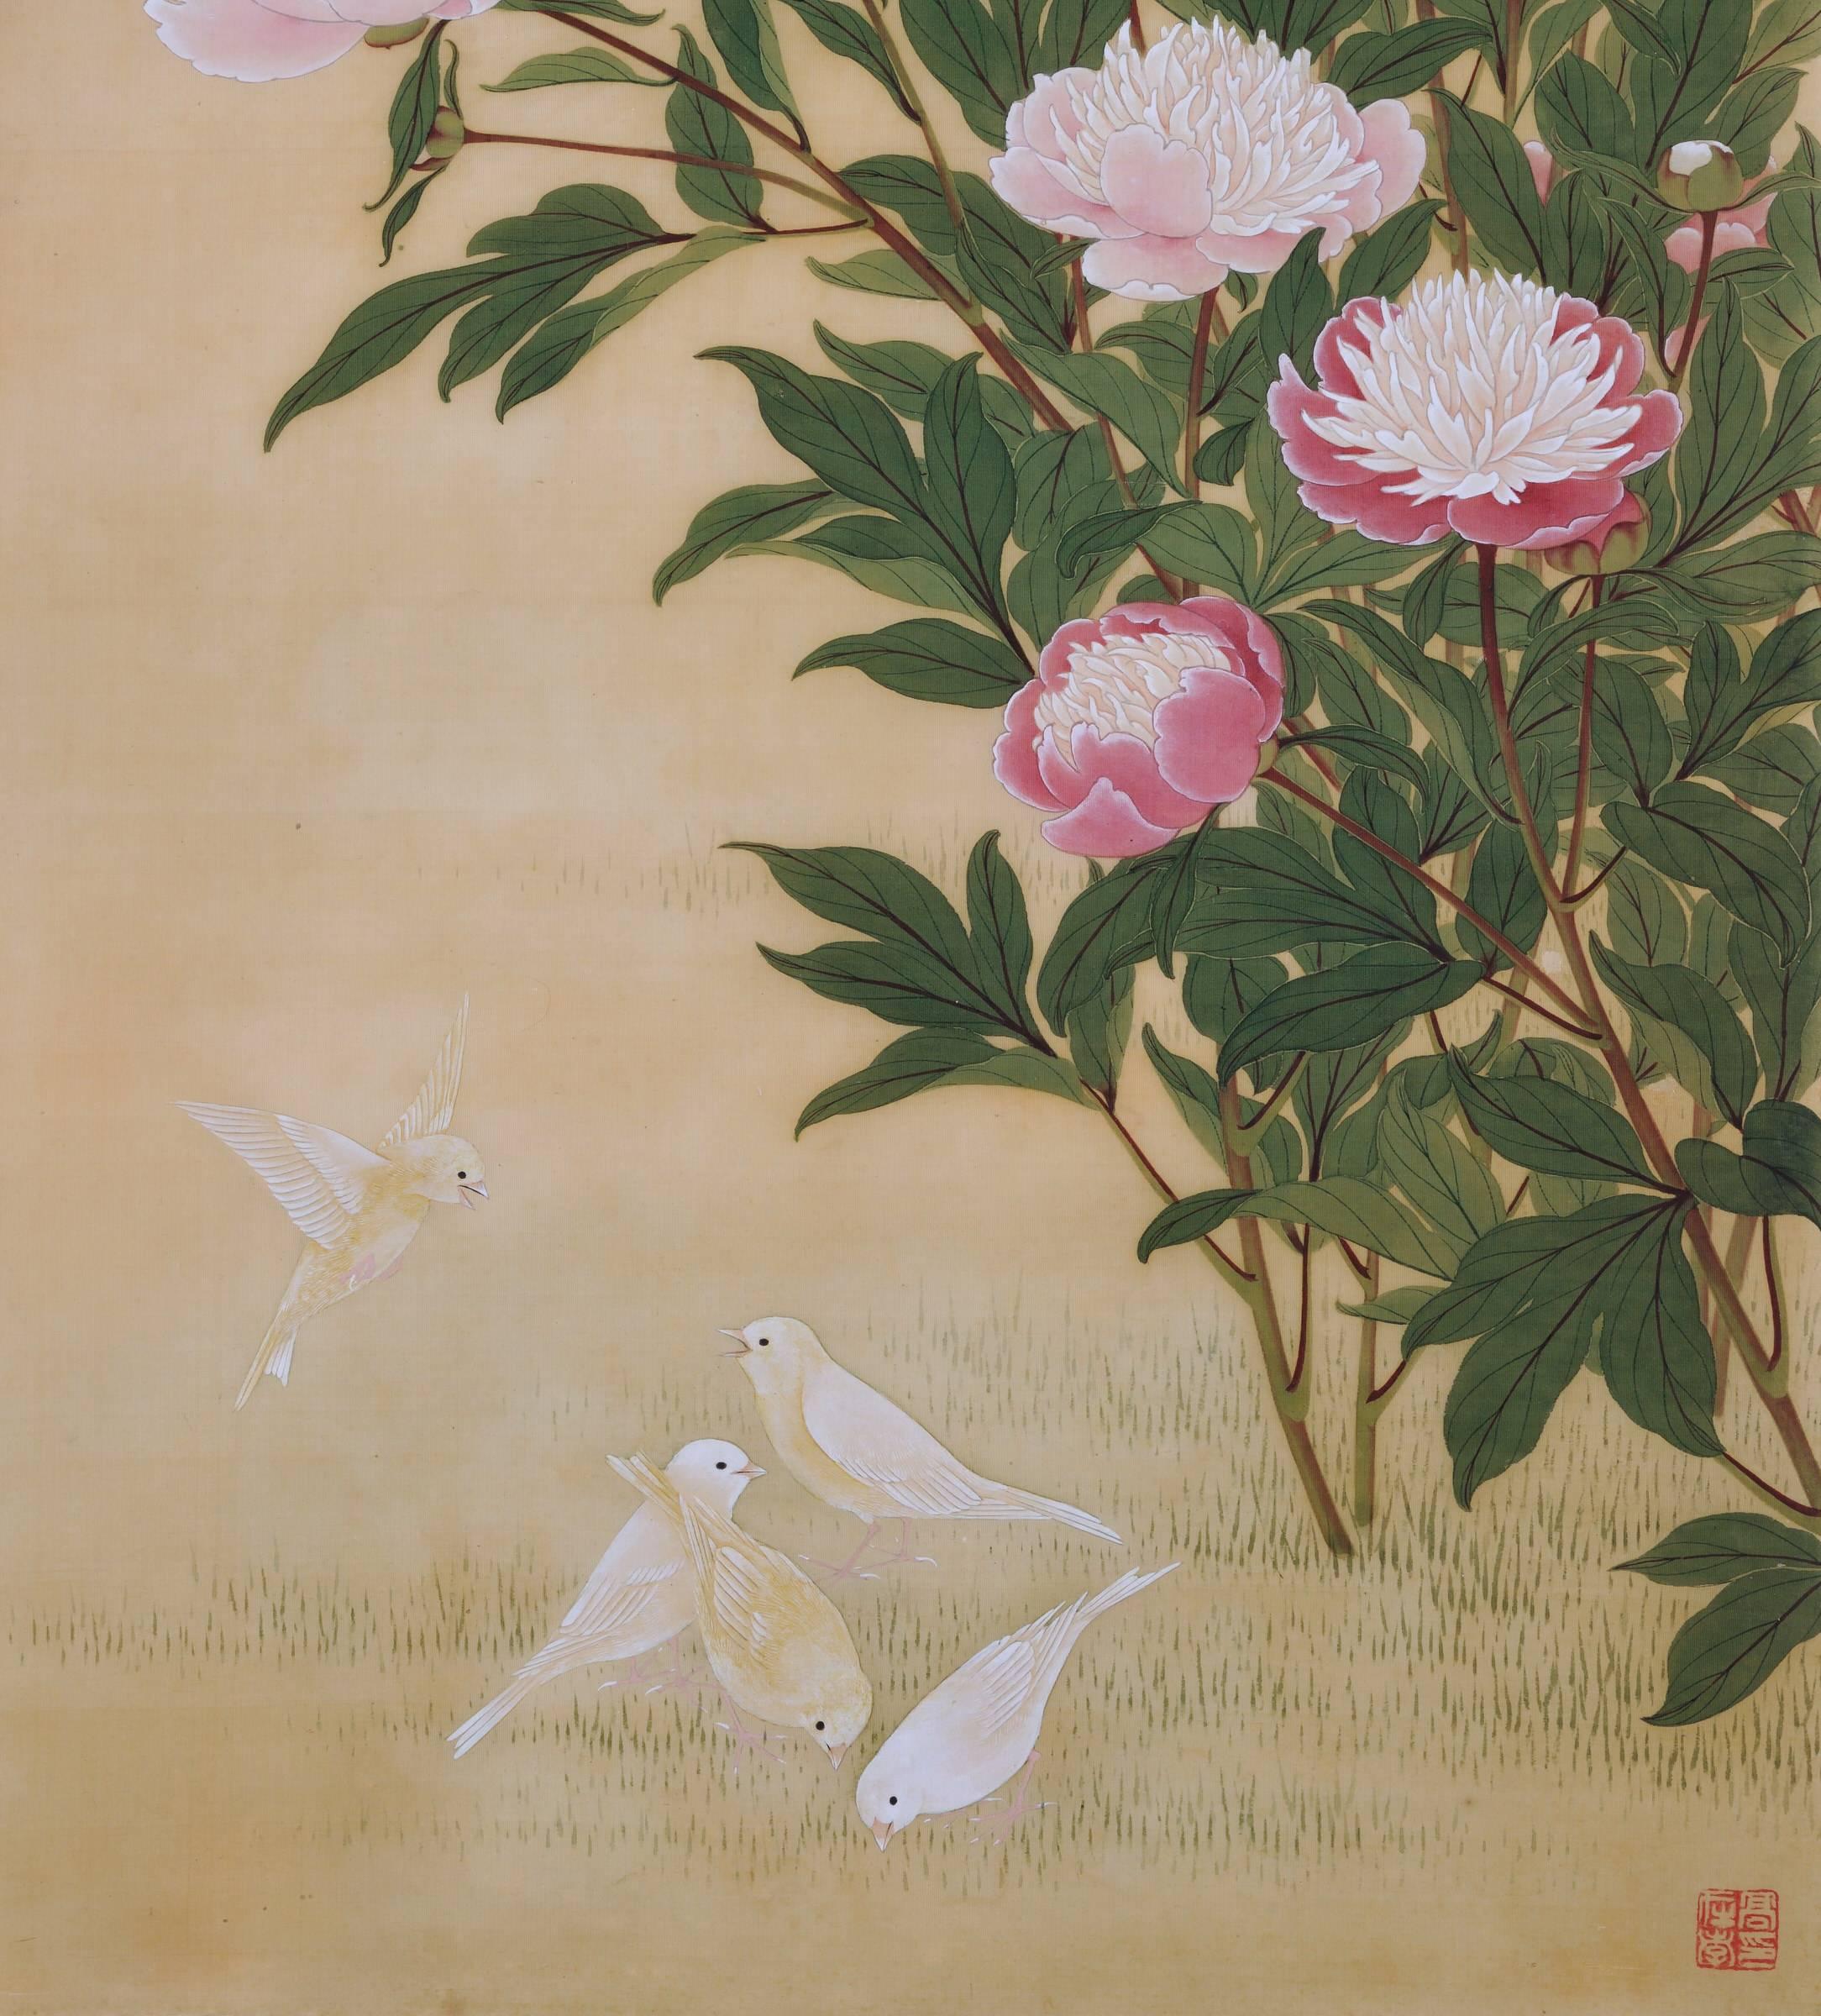 Takakura Zaiko (fl.1854-1860)

Birds and flowers of the seasons

Pheasants and peonies

Ink and color on silk

Unframed

Seal: Taka Zaiko no in 

Dimensions:

H 39” x W 16.5” (100 cm x 42.5 cm)

Bird and flower paintings by the